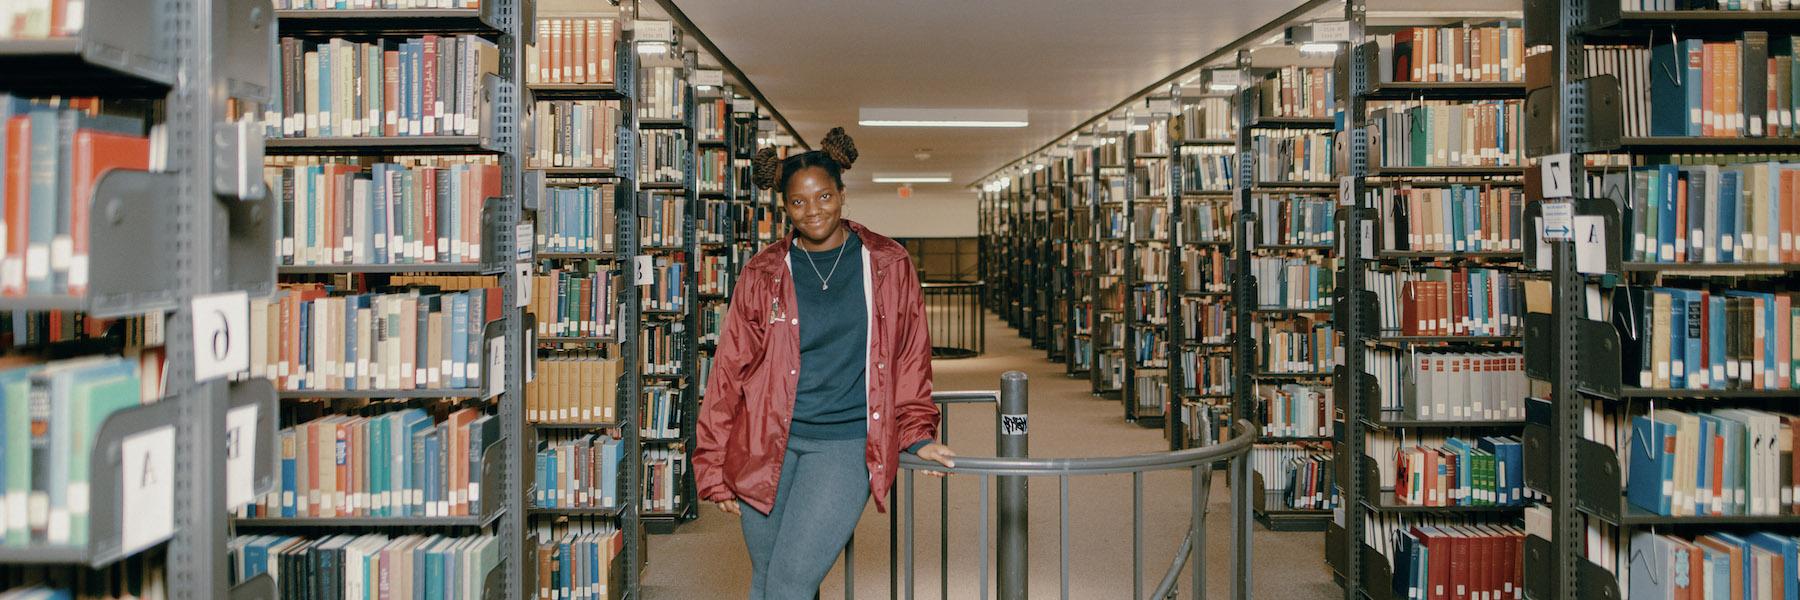 Student standing in library stacks